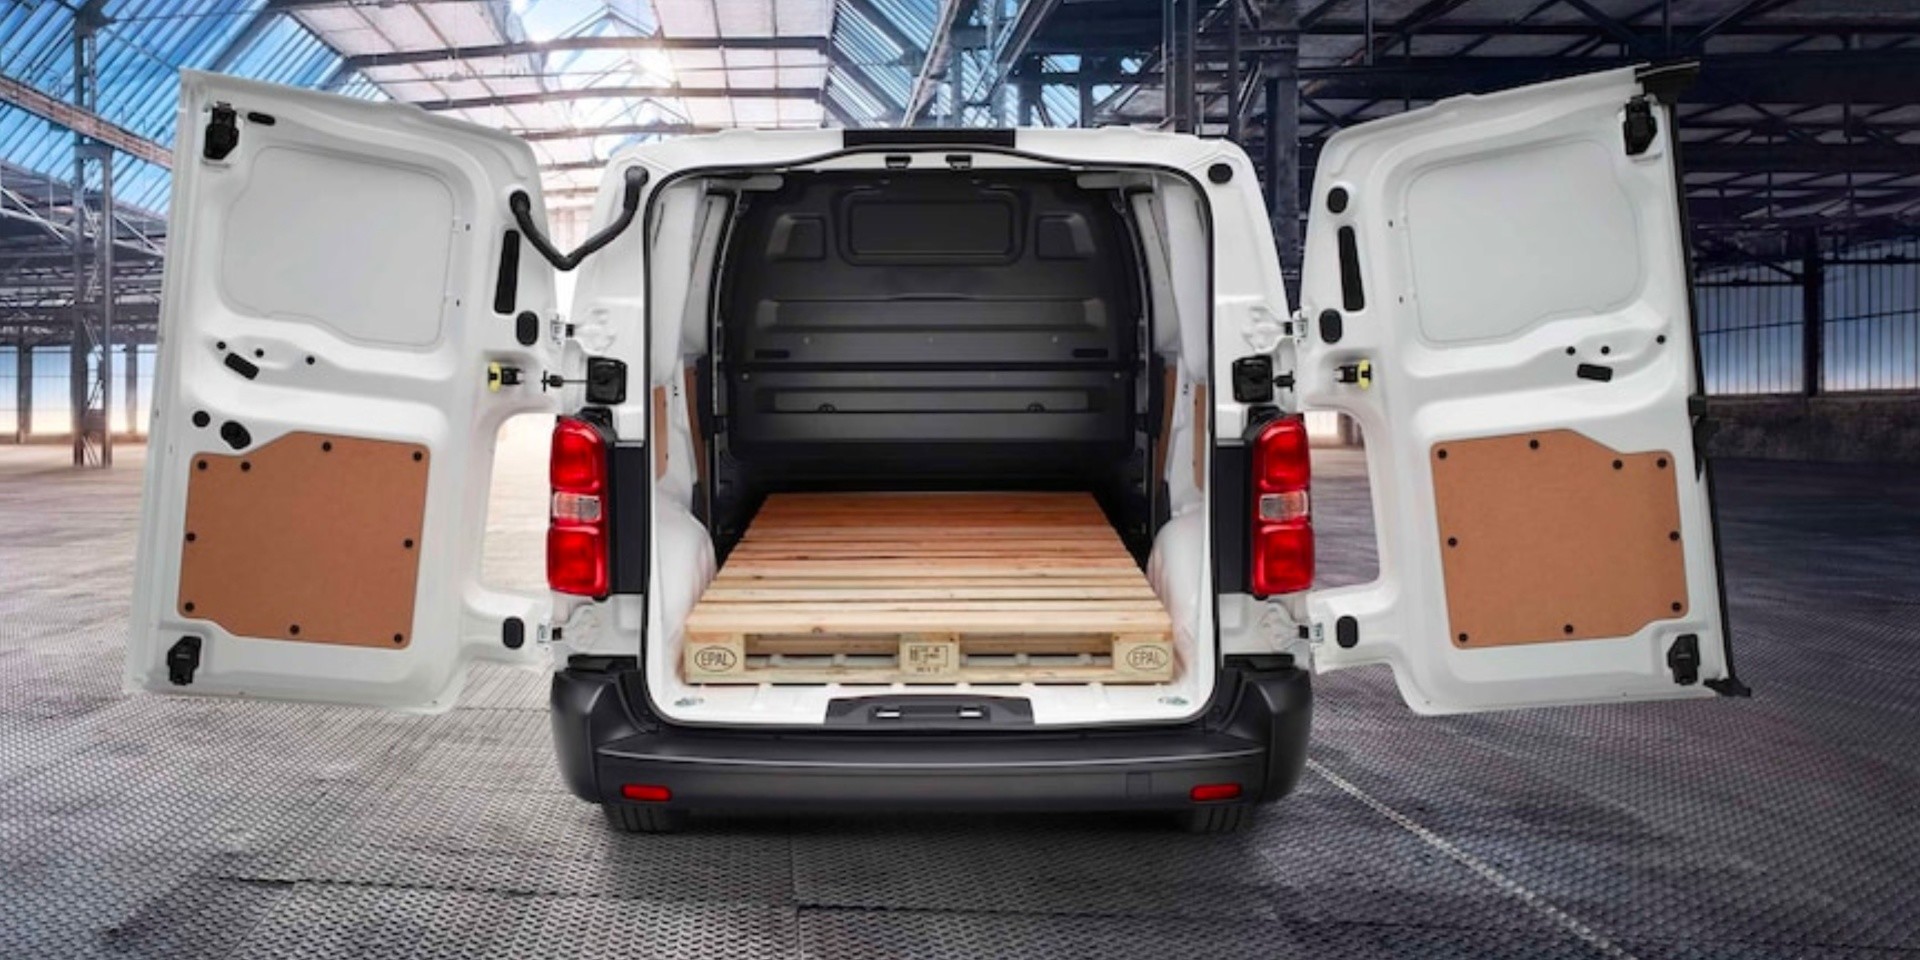 vauxhall vivaro loading space opened in a warehouse